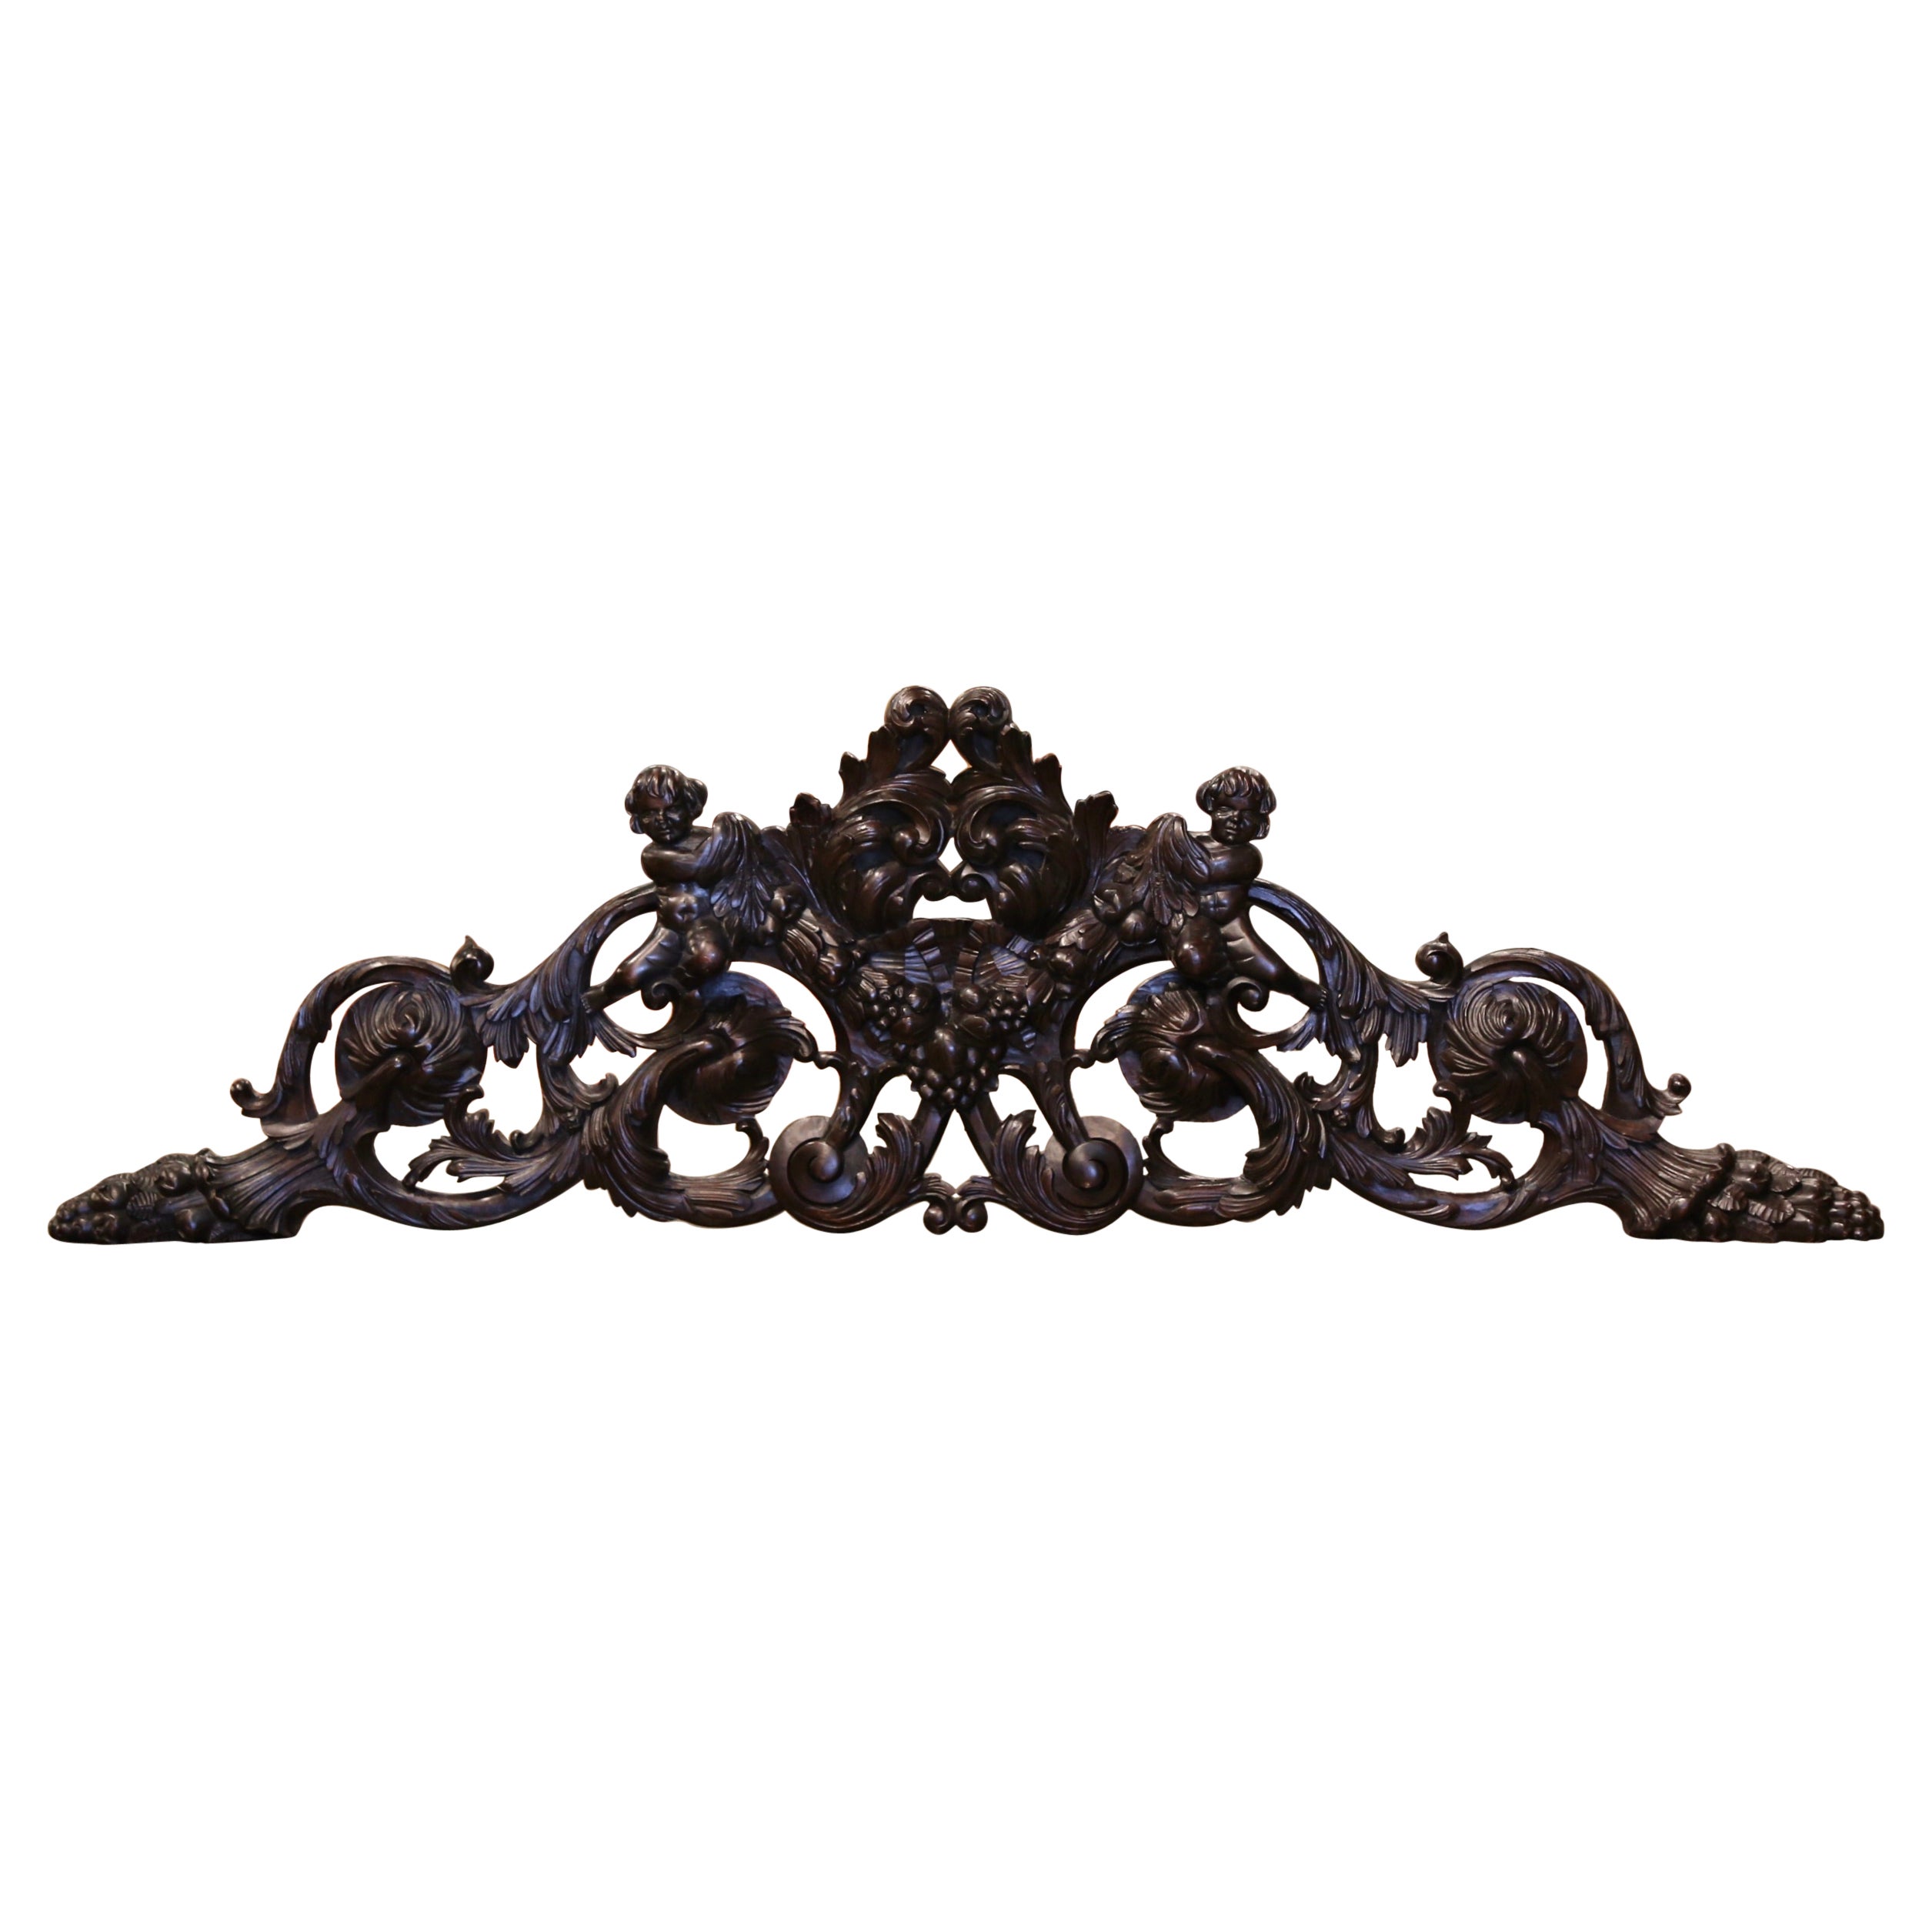 19th Century Italian Carved Walnut Wall Mounted Sculpture with Cherub Figures